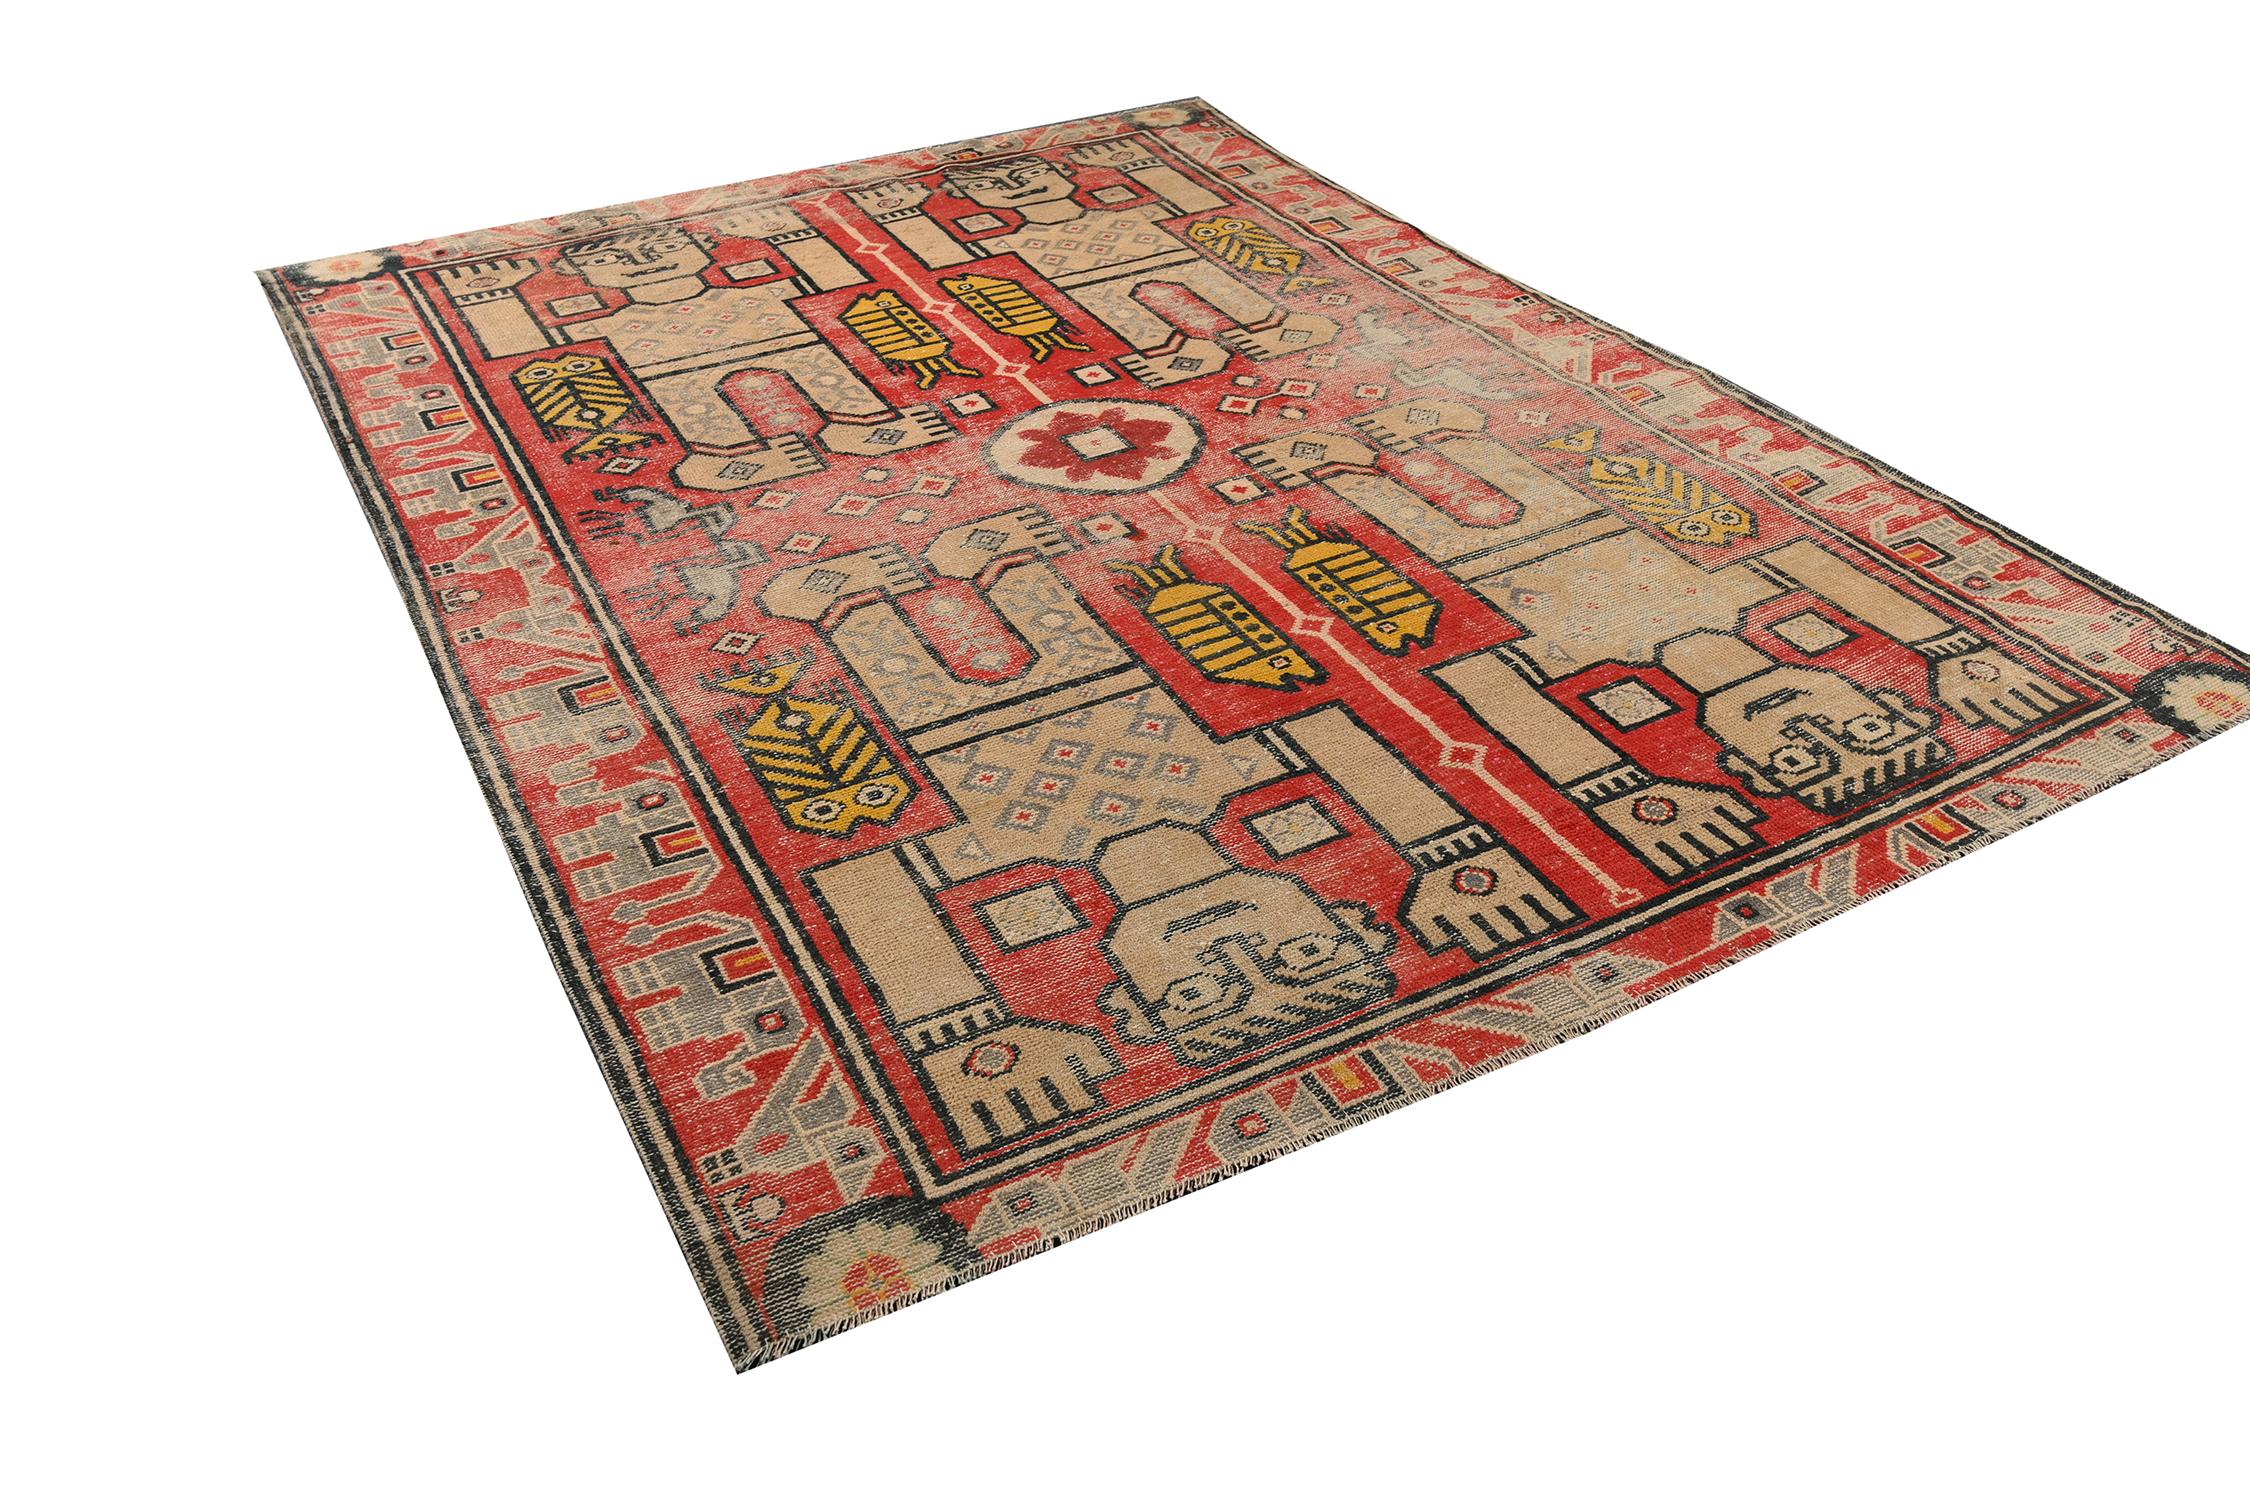 This vintage 6x8 Dhurrie is an exciting new entry in Rug & Kilim's esteemed flat weave collection. Handwoven in cotton, it originates from India circa 1950-1960. 

Further on the Design:

This flat weave carries elaborate primitivist human and fish